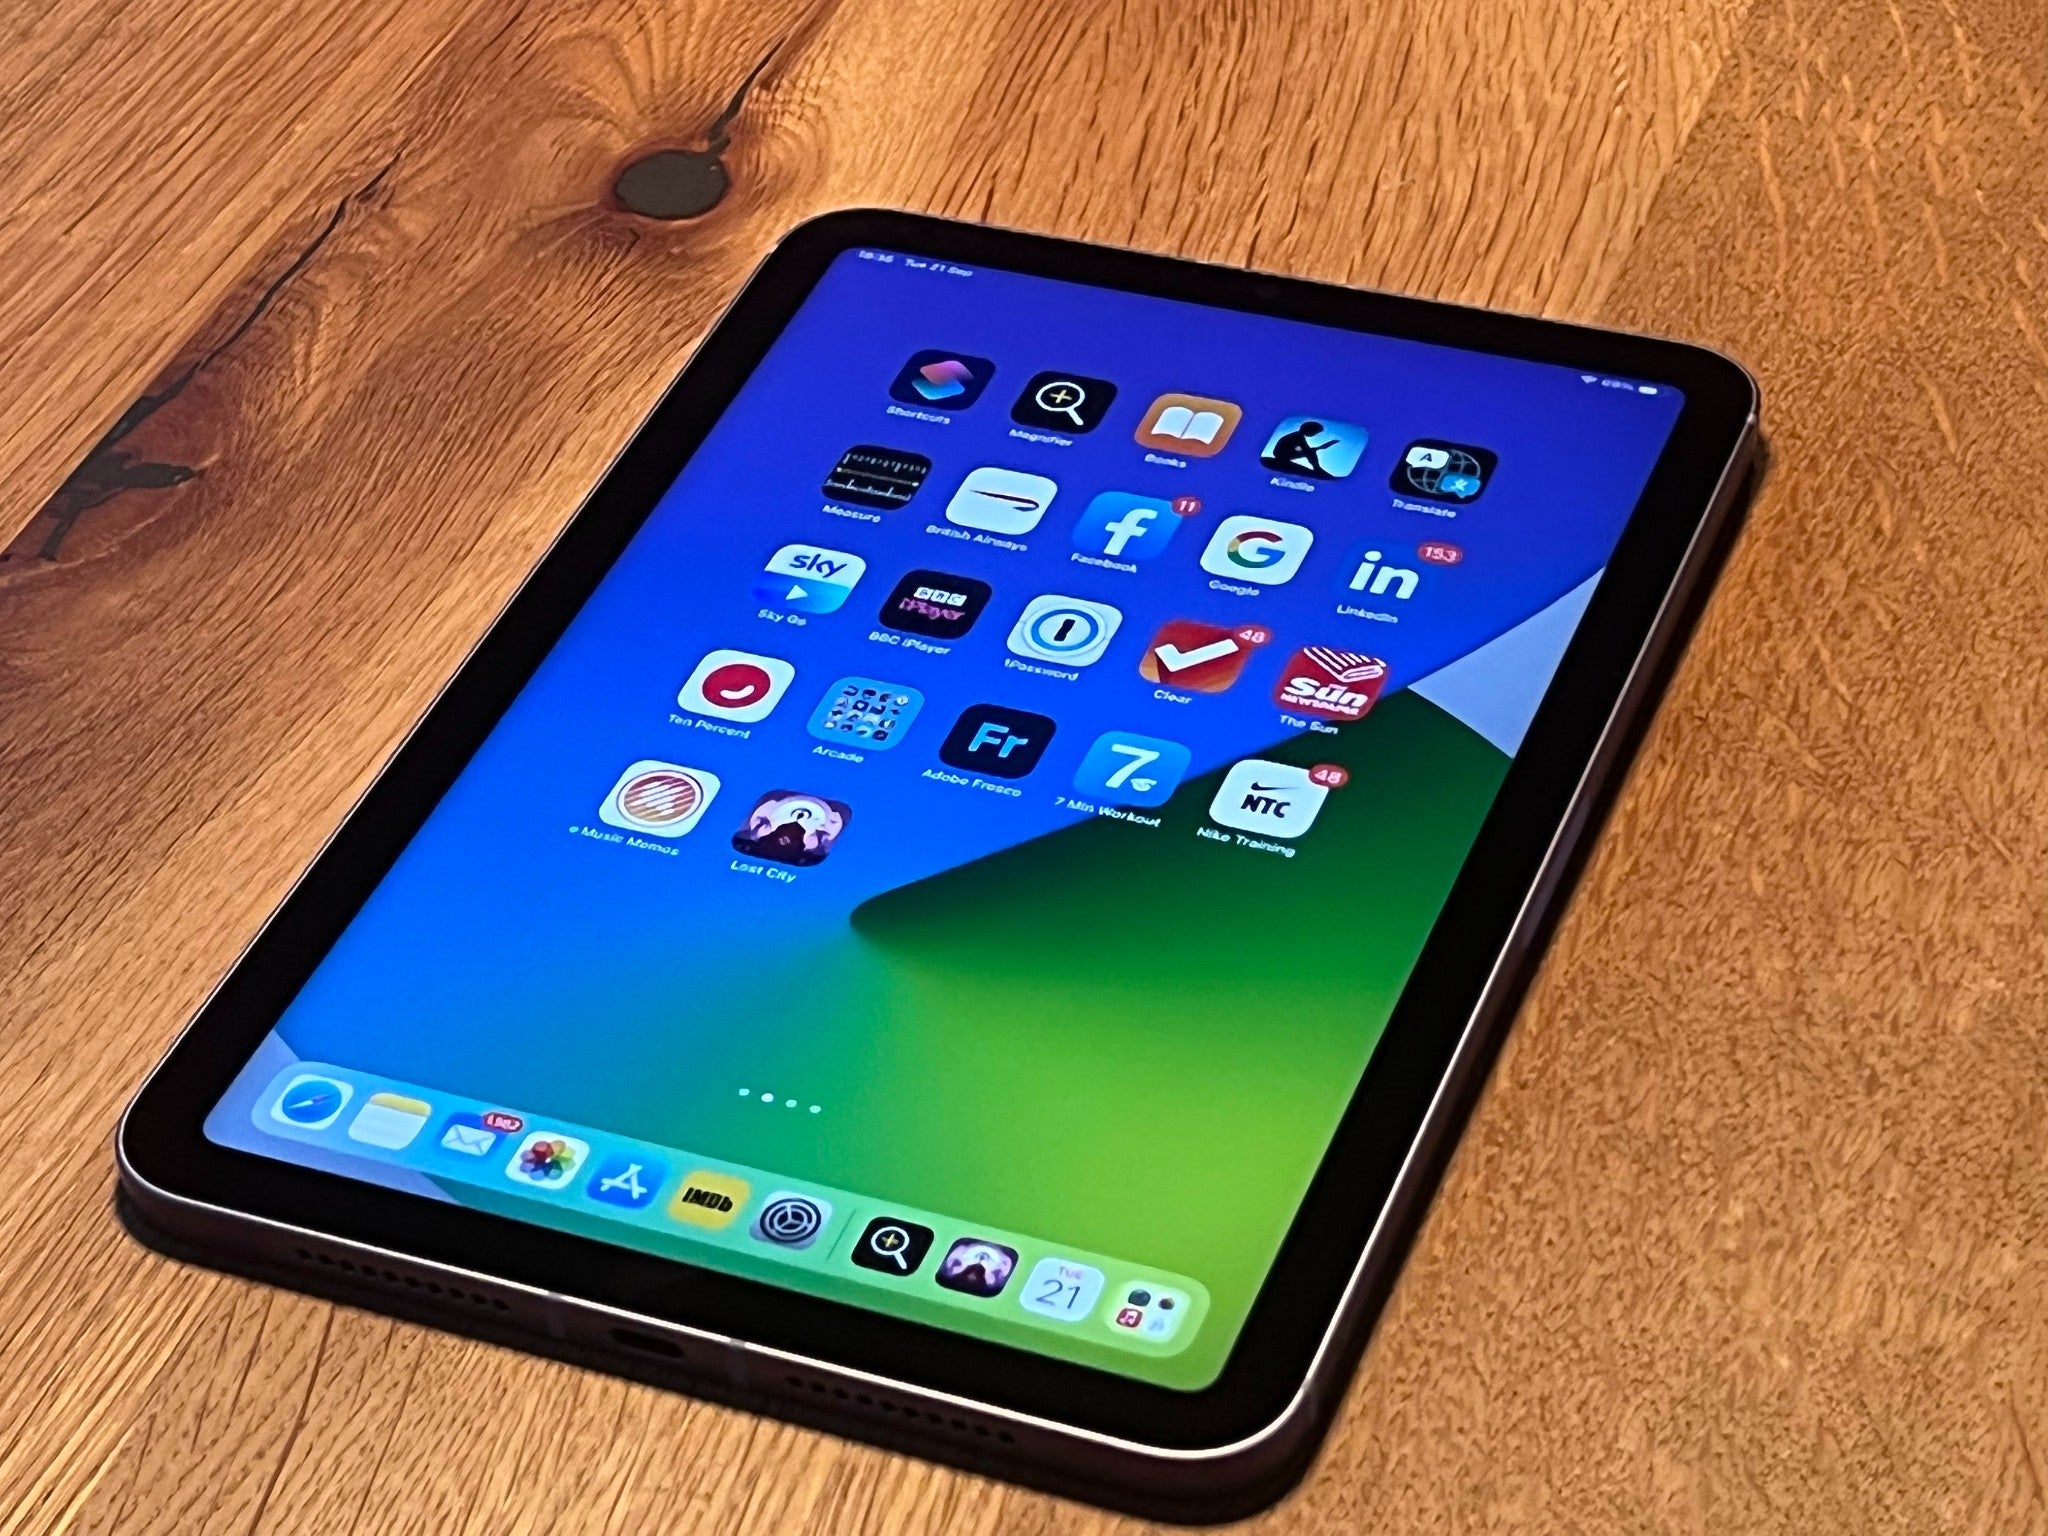 Although the dimensions of the new iPad are smaller than its predecessor, the screen display size has grown from 7.9in to 8.3in